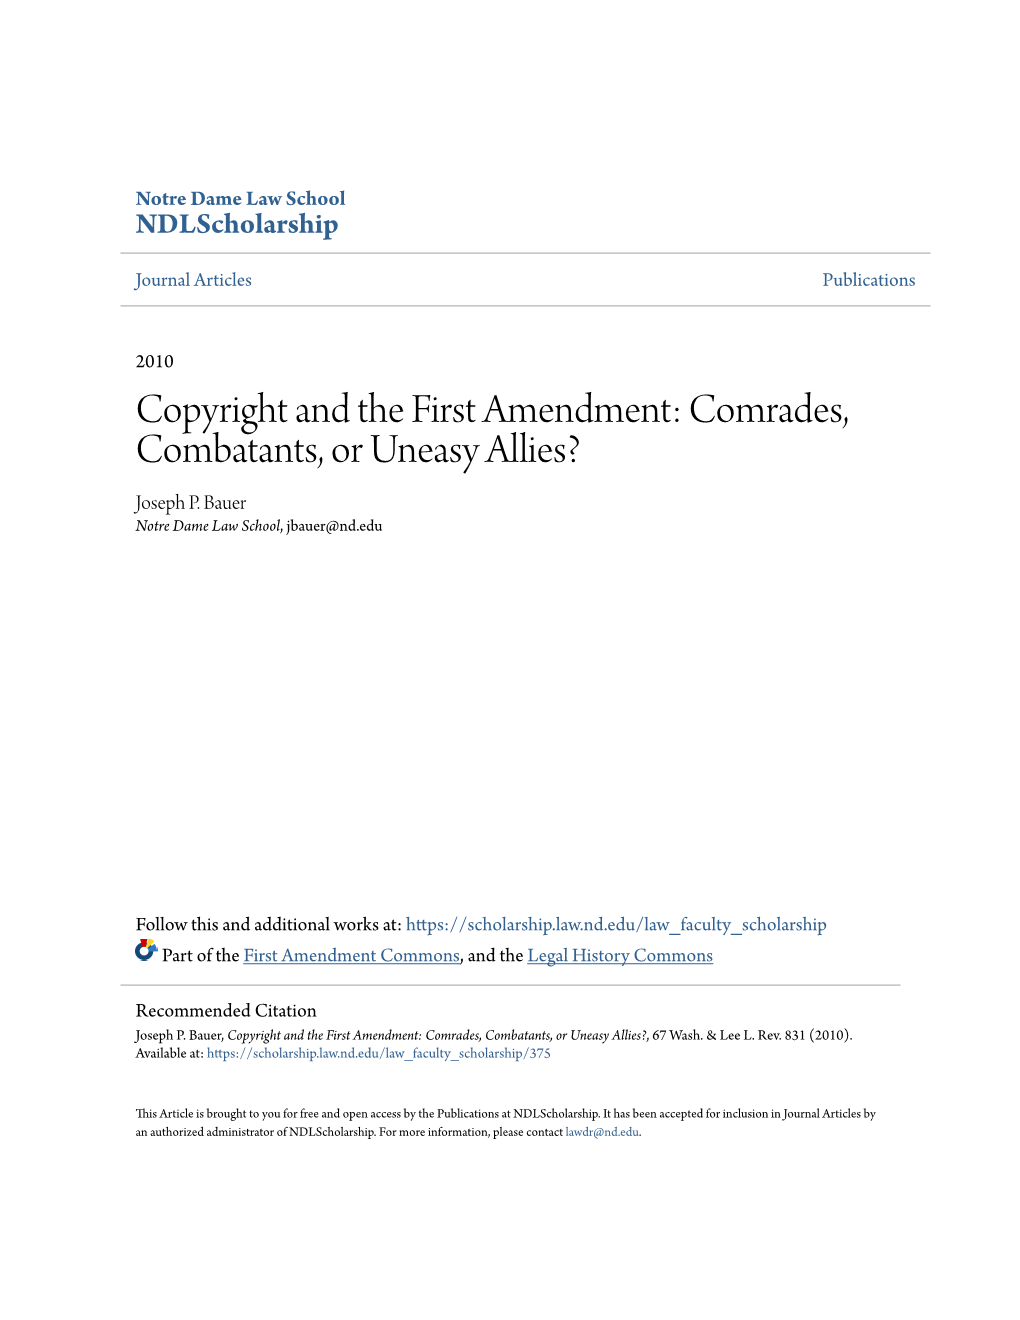 Copyright and the First Amendment: Comrades, Combatants, Or Uneasy Allies? Joseph P